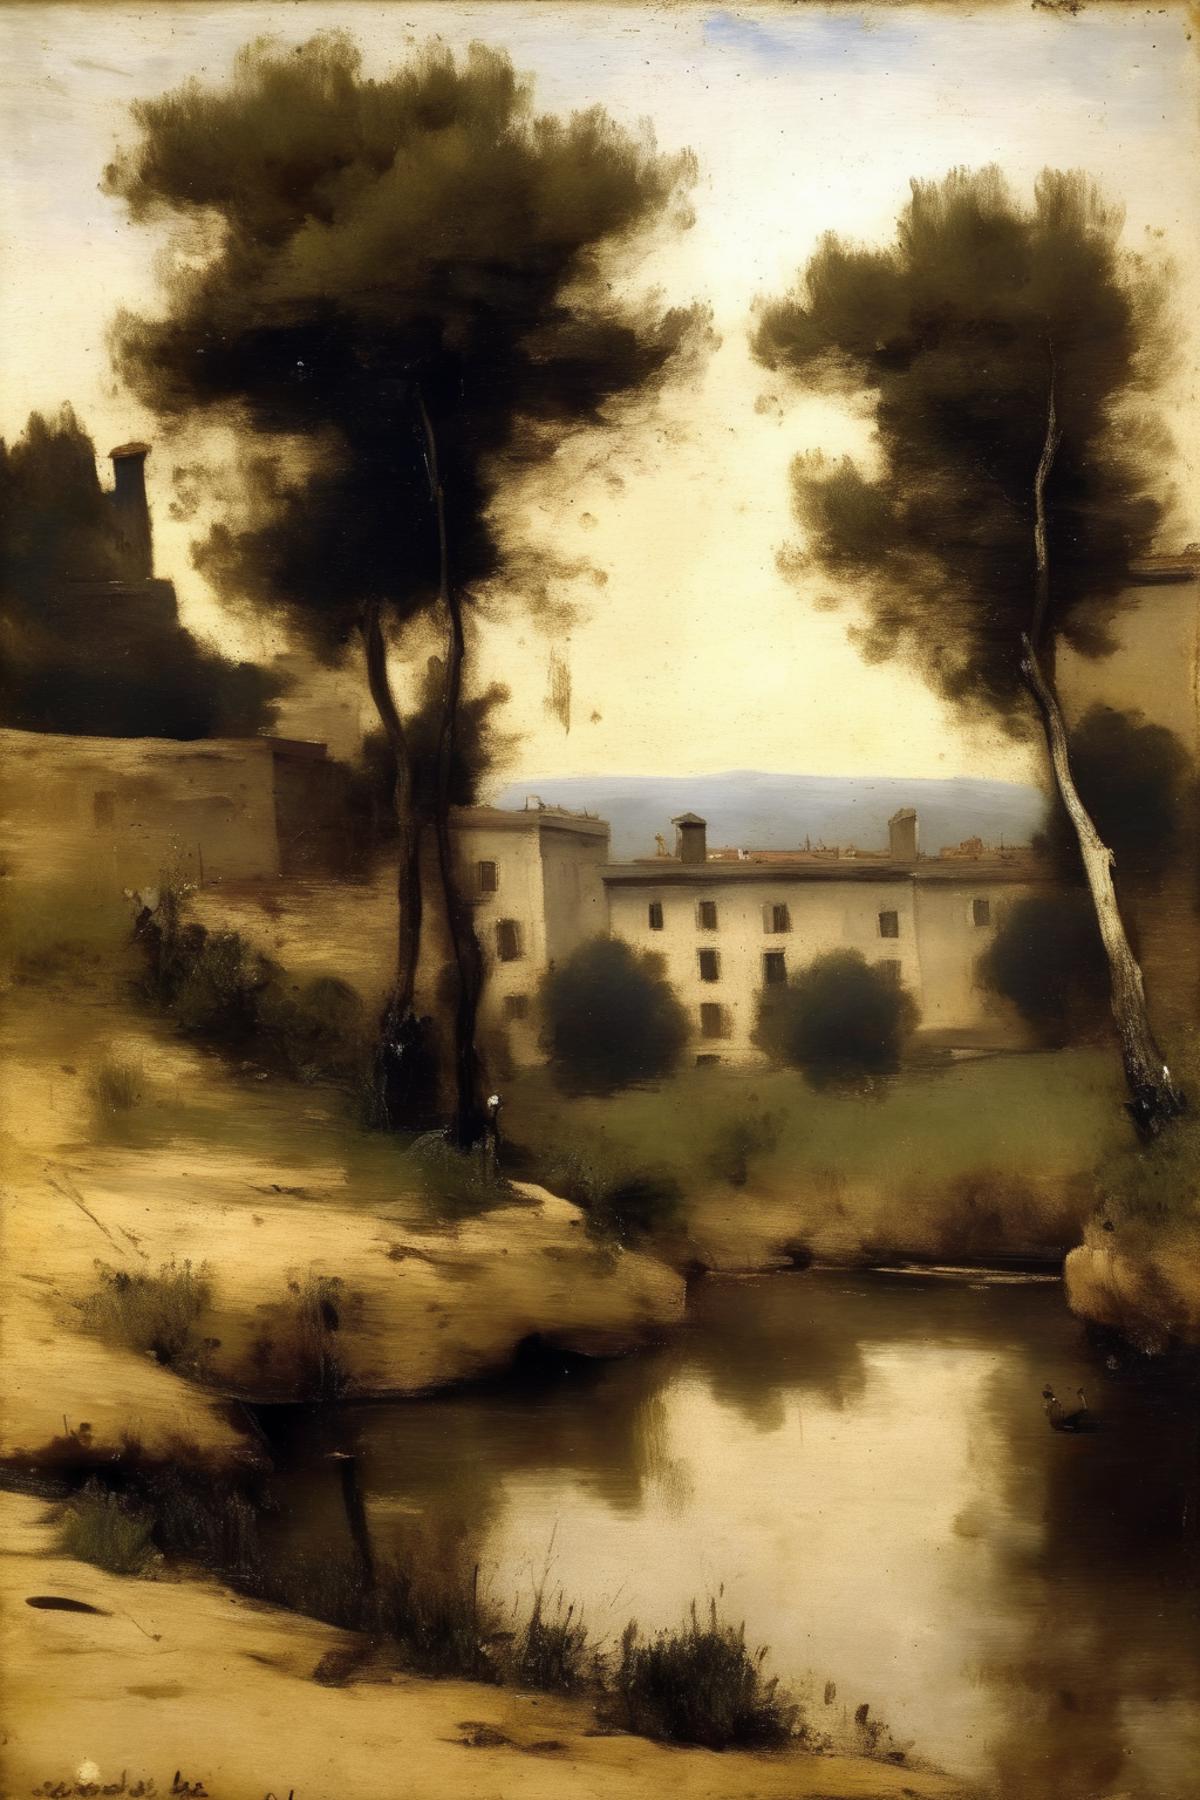 Jean-Baptiste-Camille Corot Style image by Kappa_Neuro